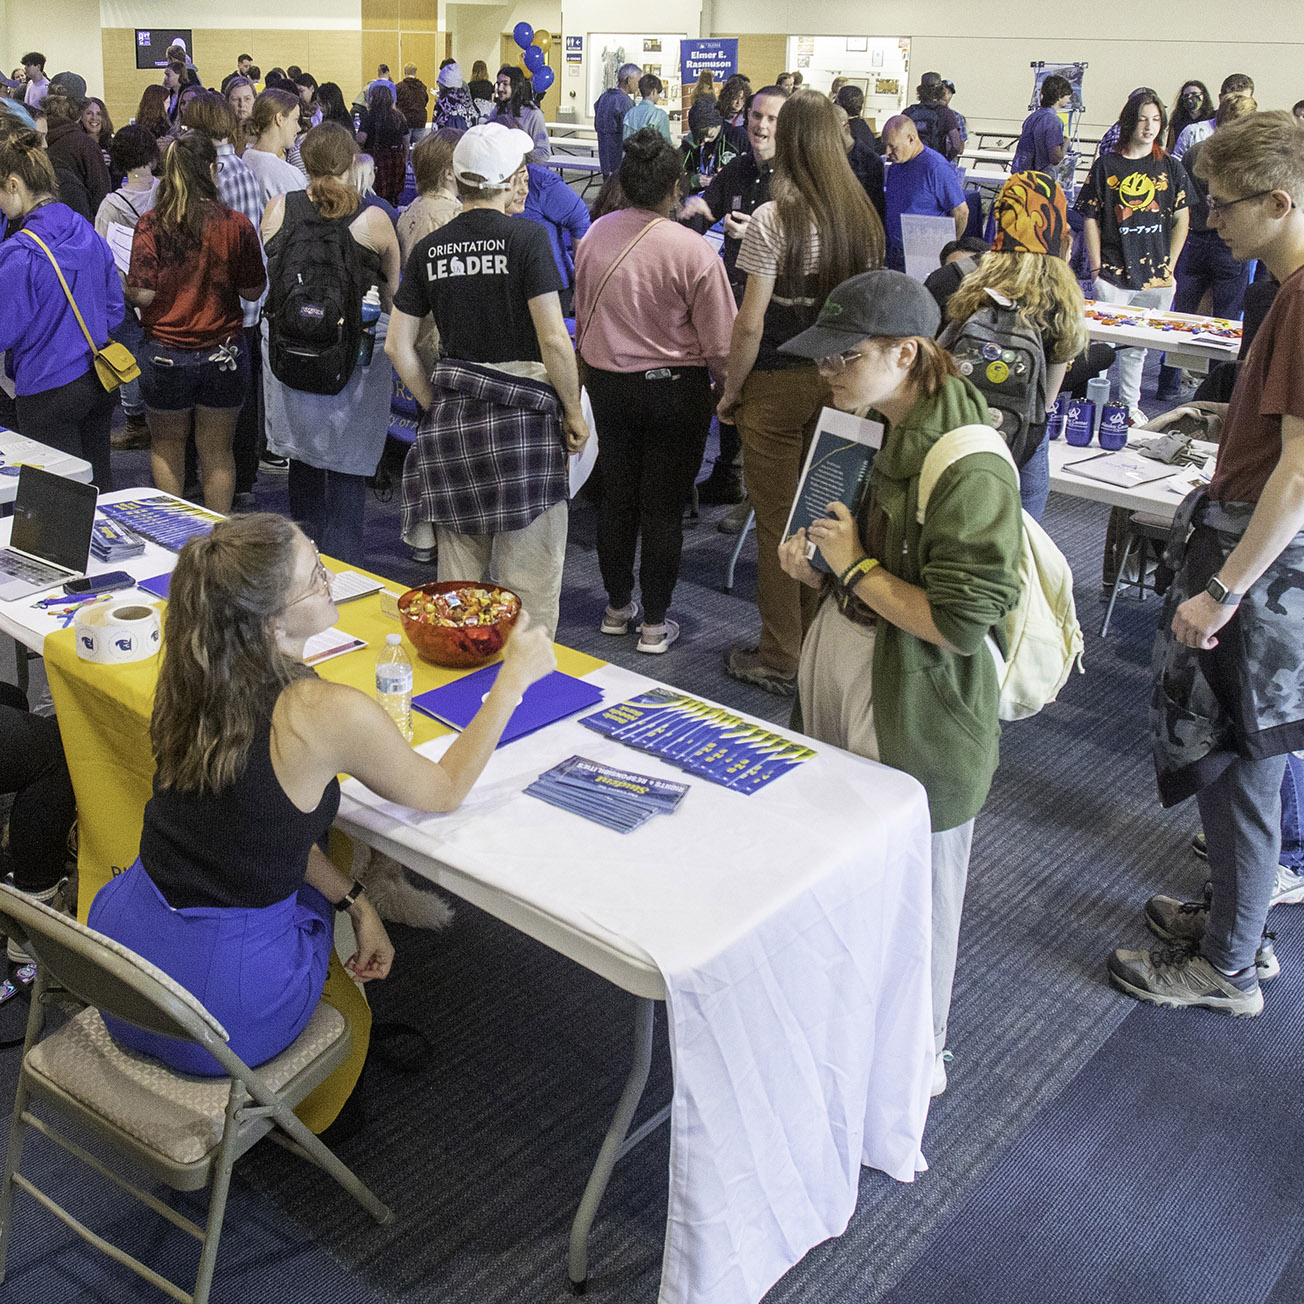 Students talk to advisors and representatives during a registration event at the University of Alaska Fairbanks.